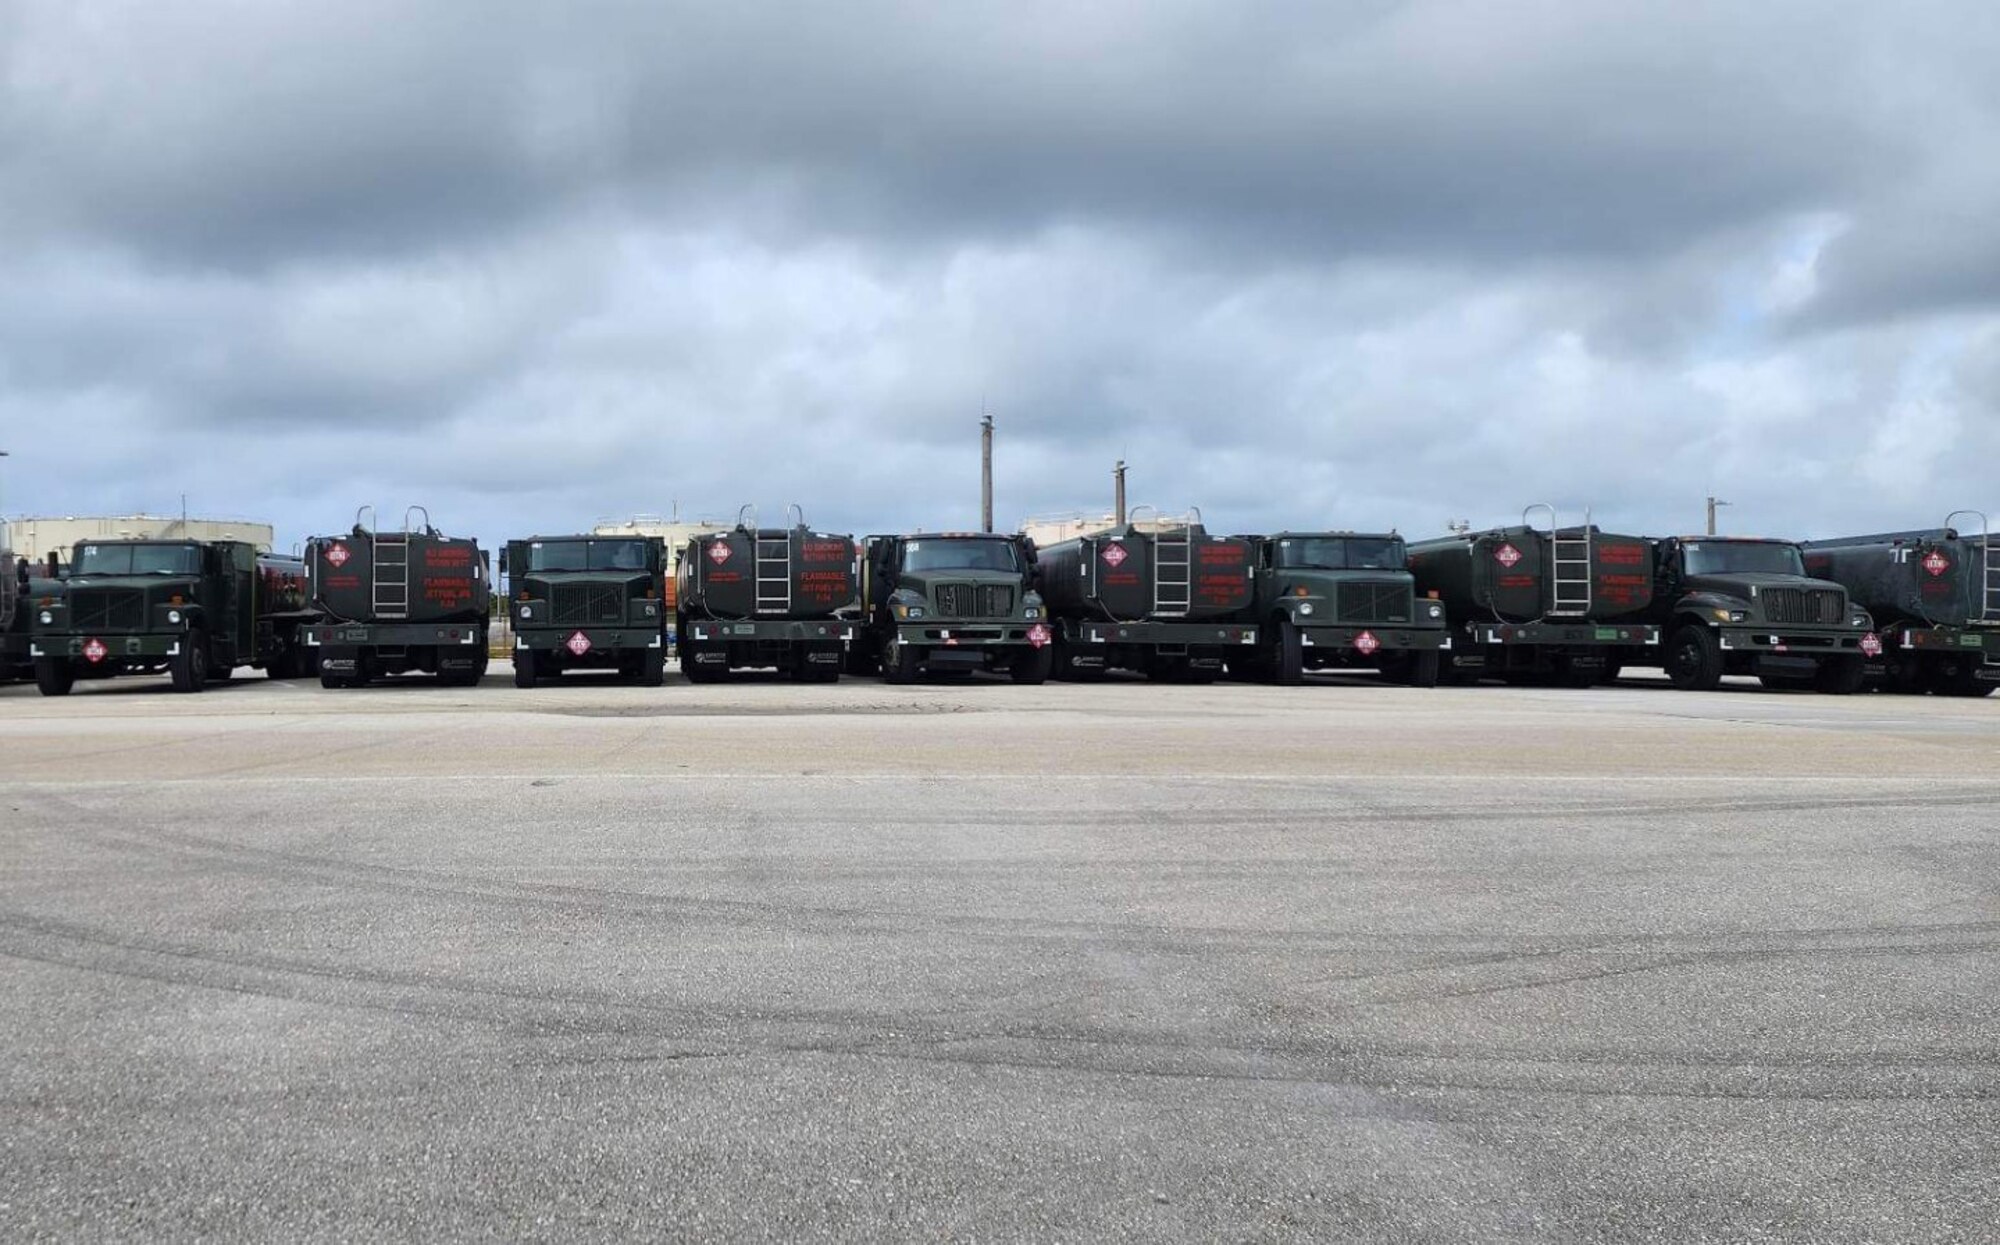 Several 36th Logistics Readiness Squadron fuel trucks are configured in a ‘storm formation’ at Andersen Air Force Base, Guam. The trucks were relocated and strapped down in preparation for Typhoon Mawar, which hit Guam May 24, 2023. (Courtesy photo)